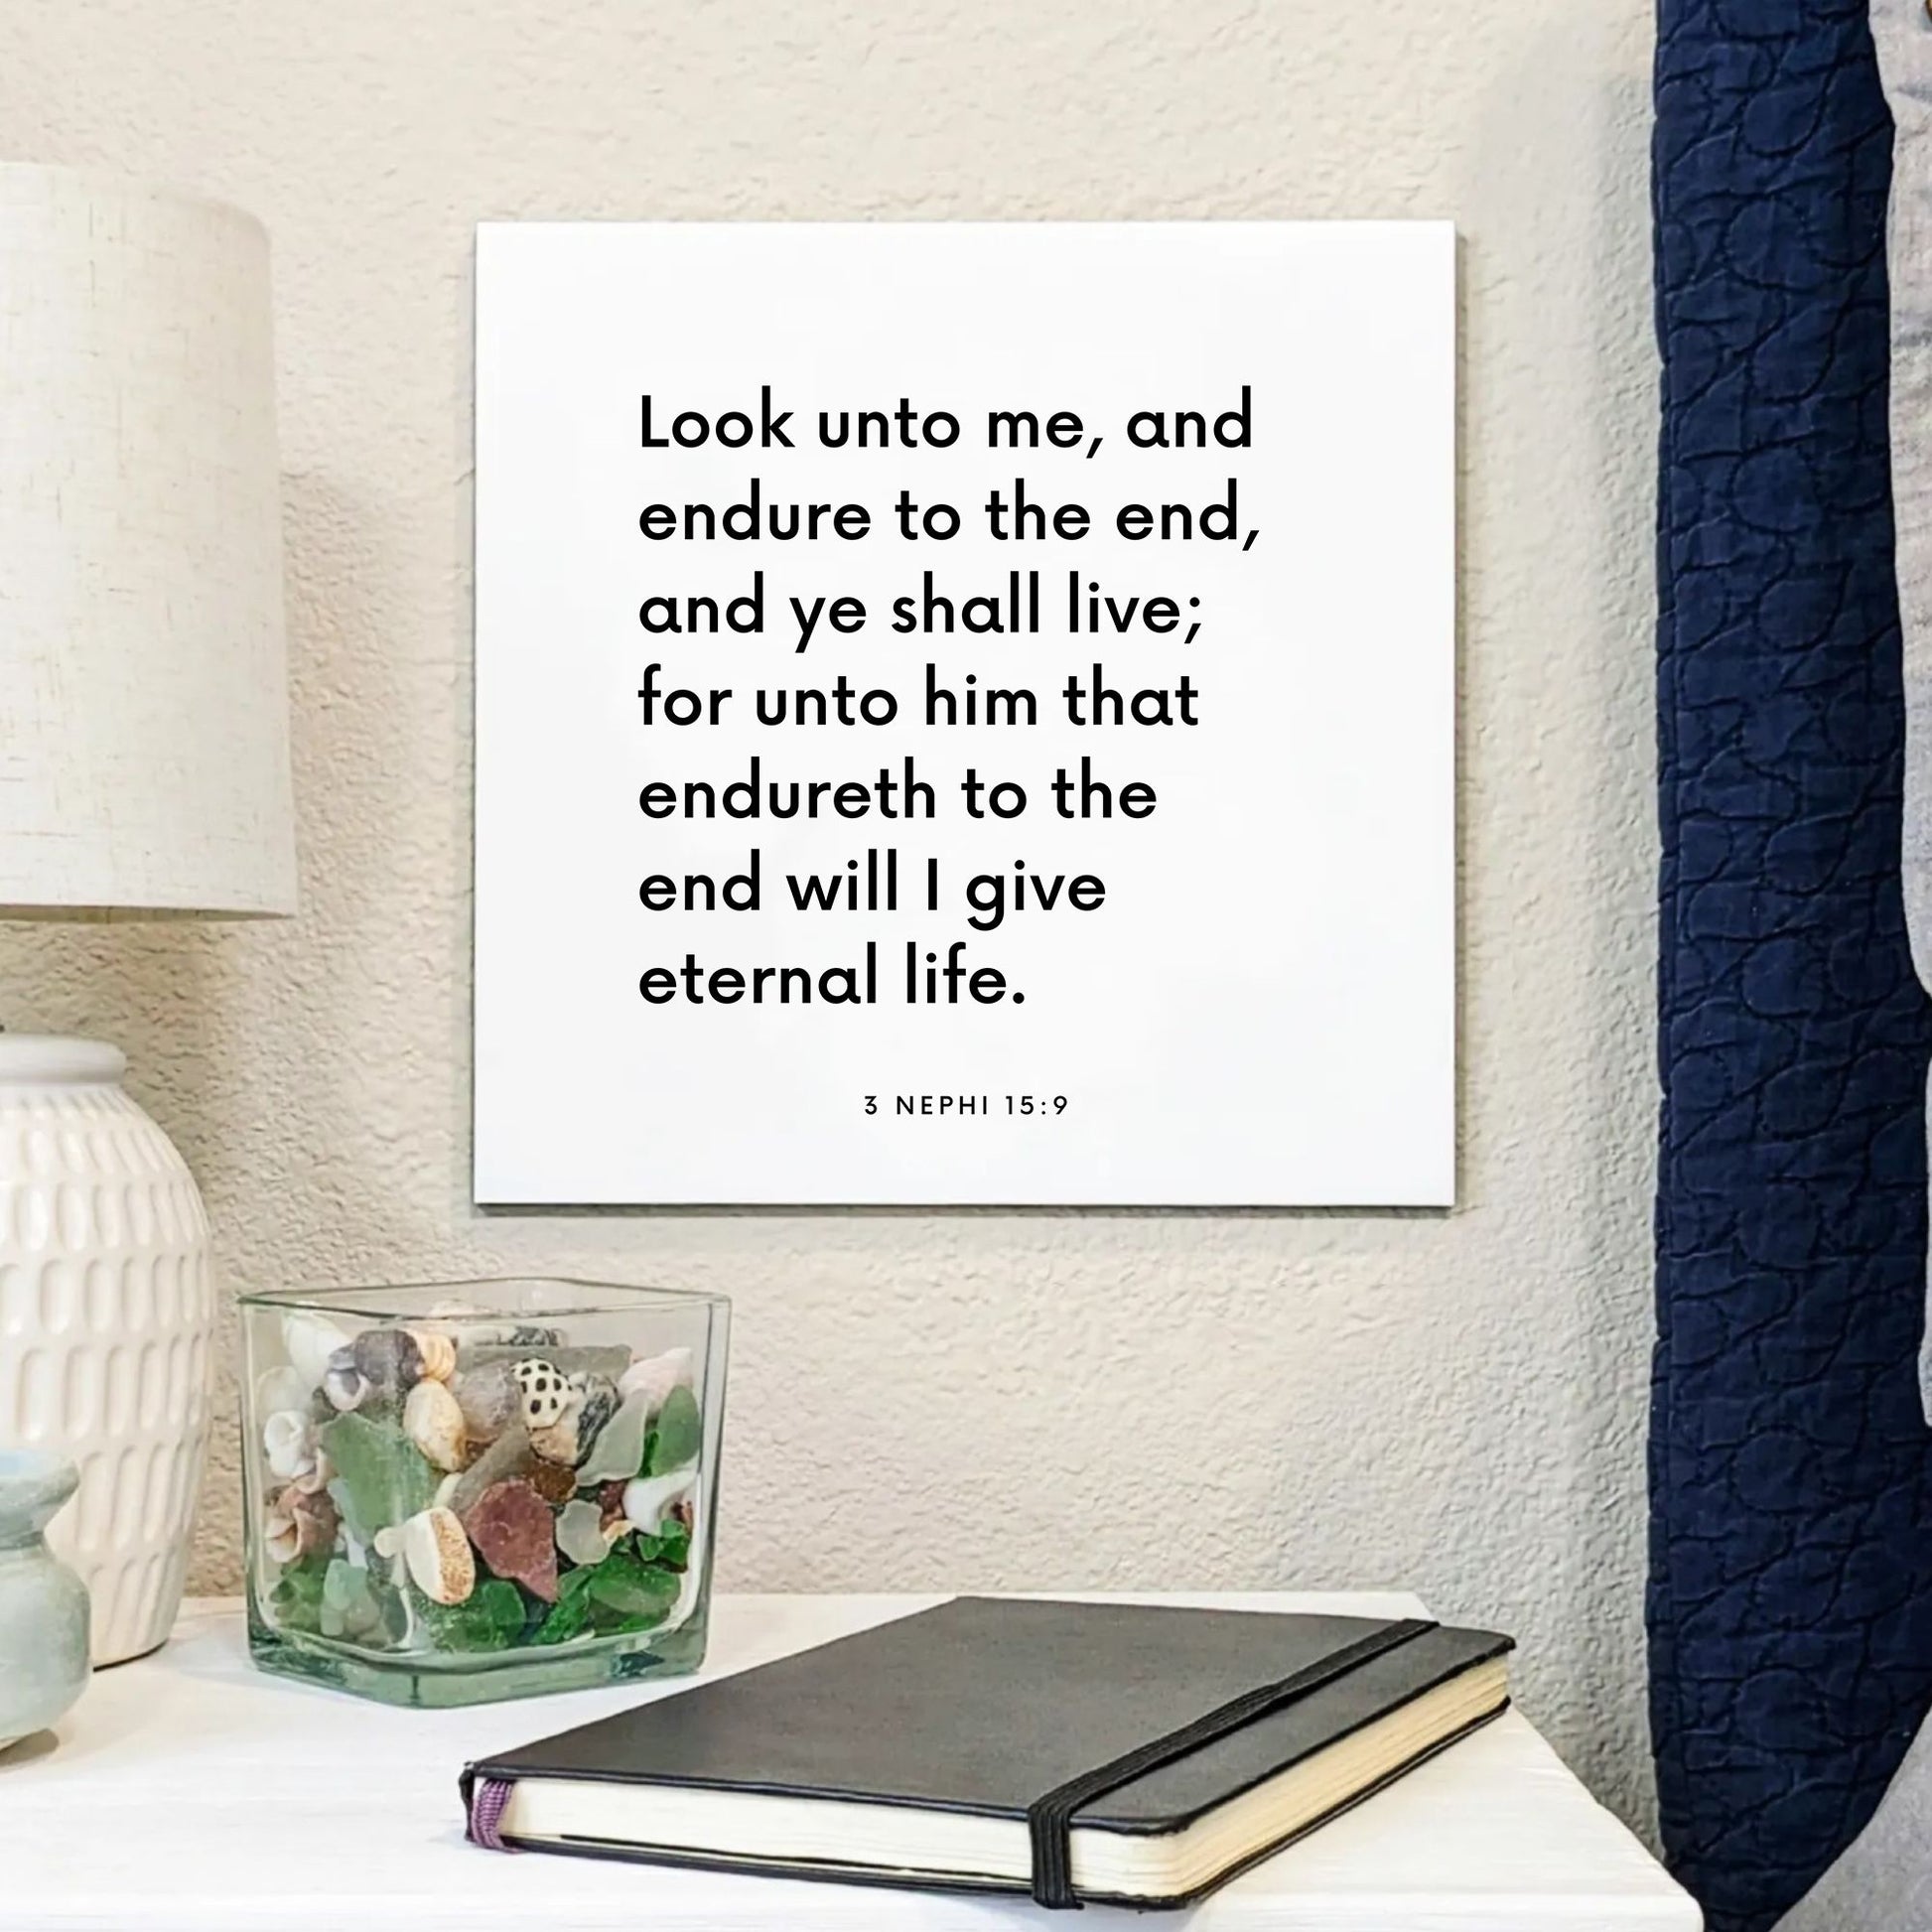 Bedside mouting of the scripture tile for 3 Nephi 15:9 - "Look unto me, and endure to the end, and ye shall live"